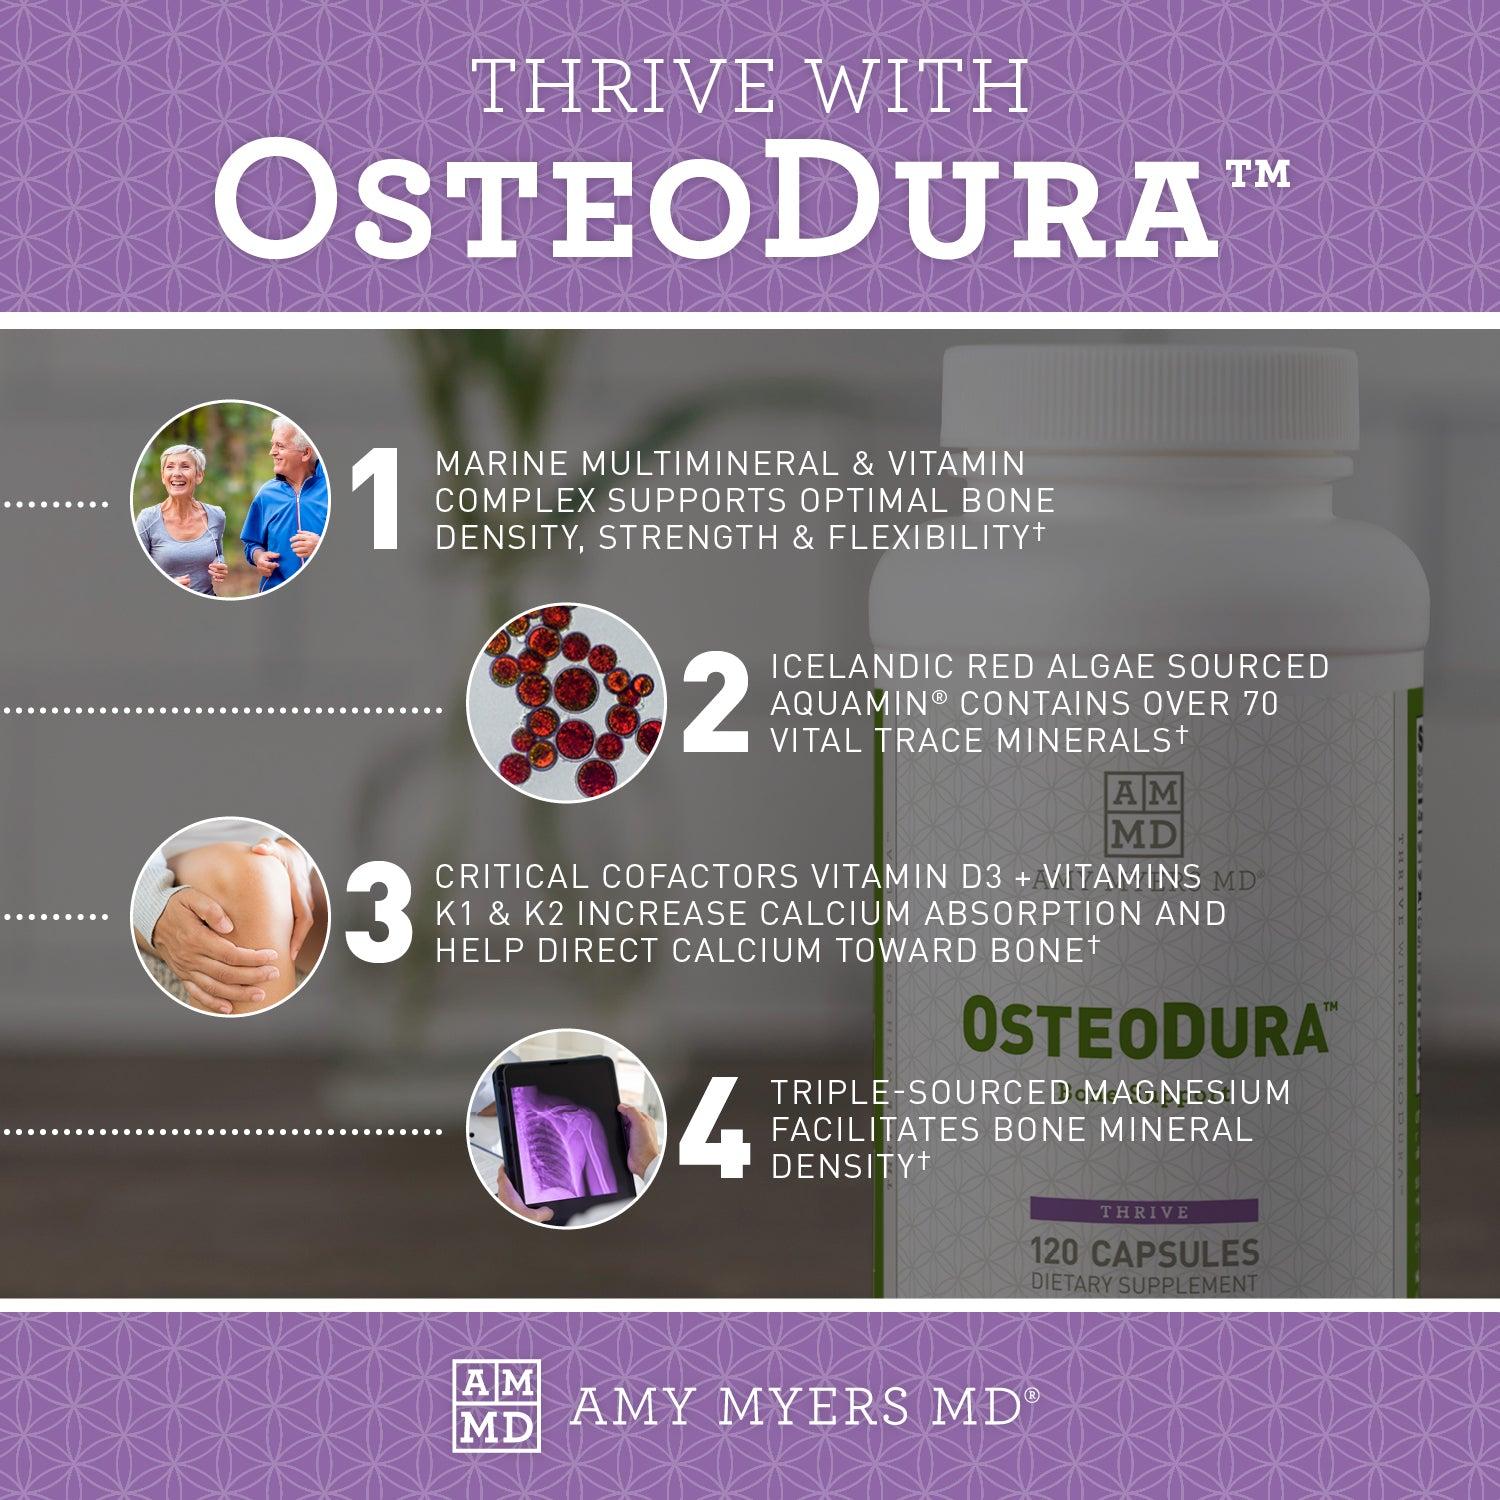 Thrive with OsteaDura Bone Health Supplement. Marine Multimineral & Vitamin, Vitamin D and K1 & K2, Magnesium and Icelandic Red Algae - Infographic - Amy Myers MD®